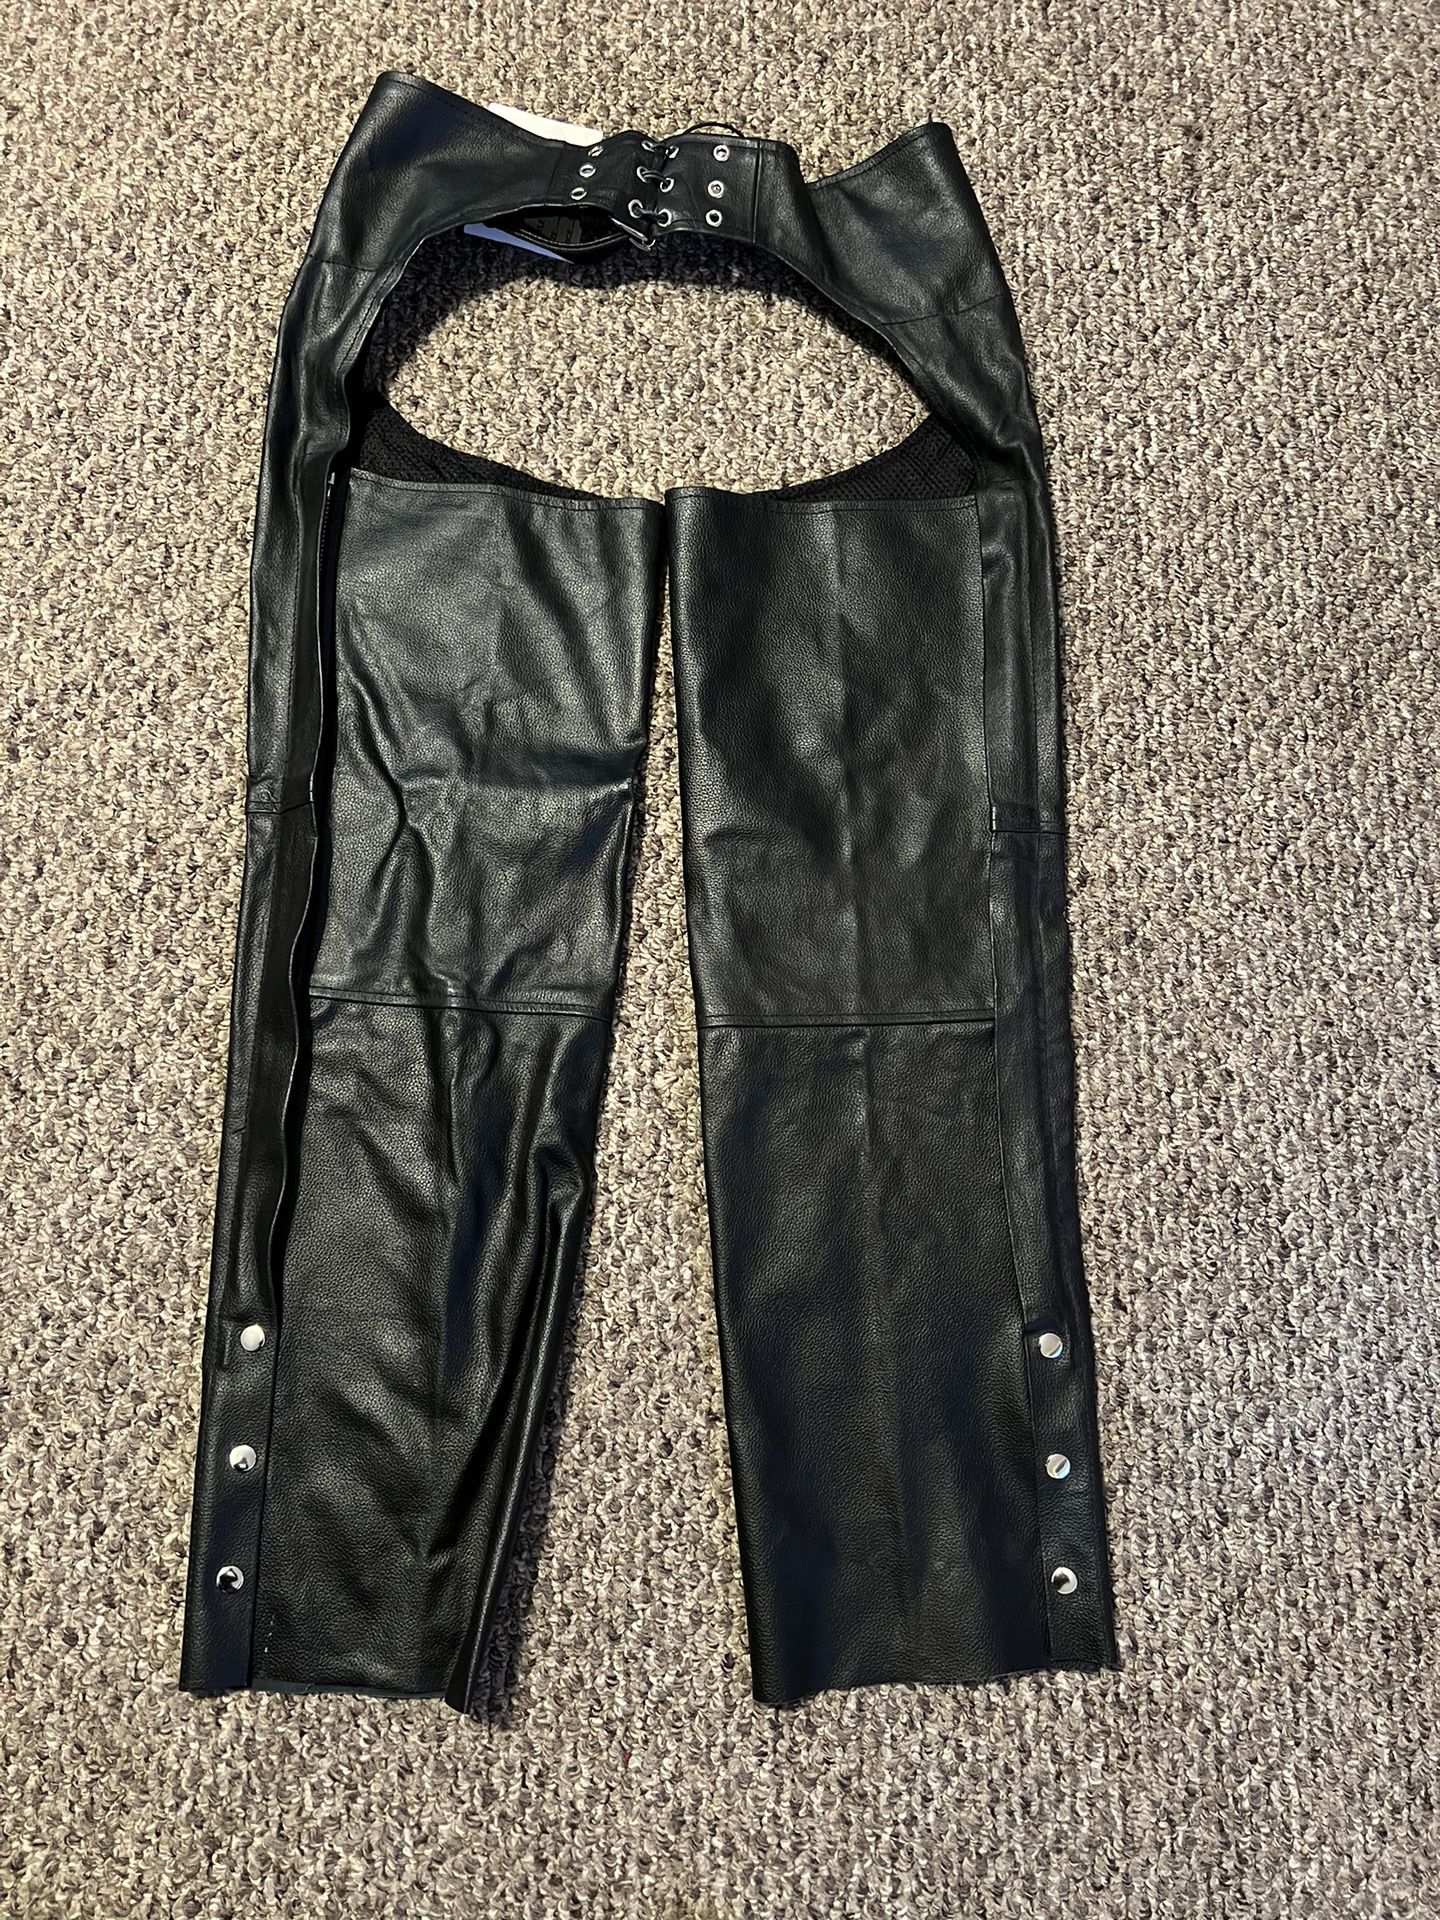 Chaps Genuine Leather